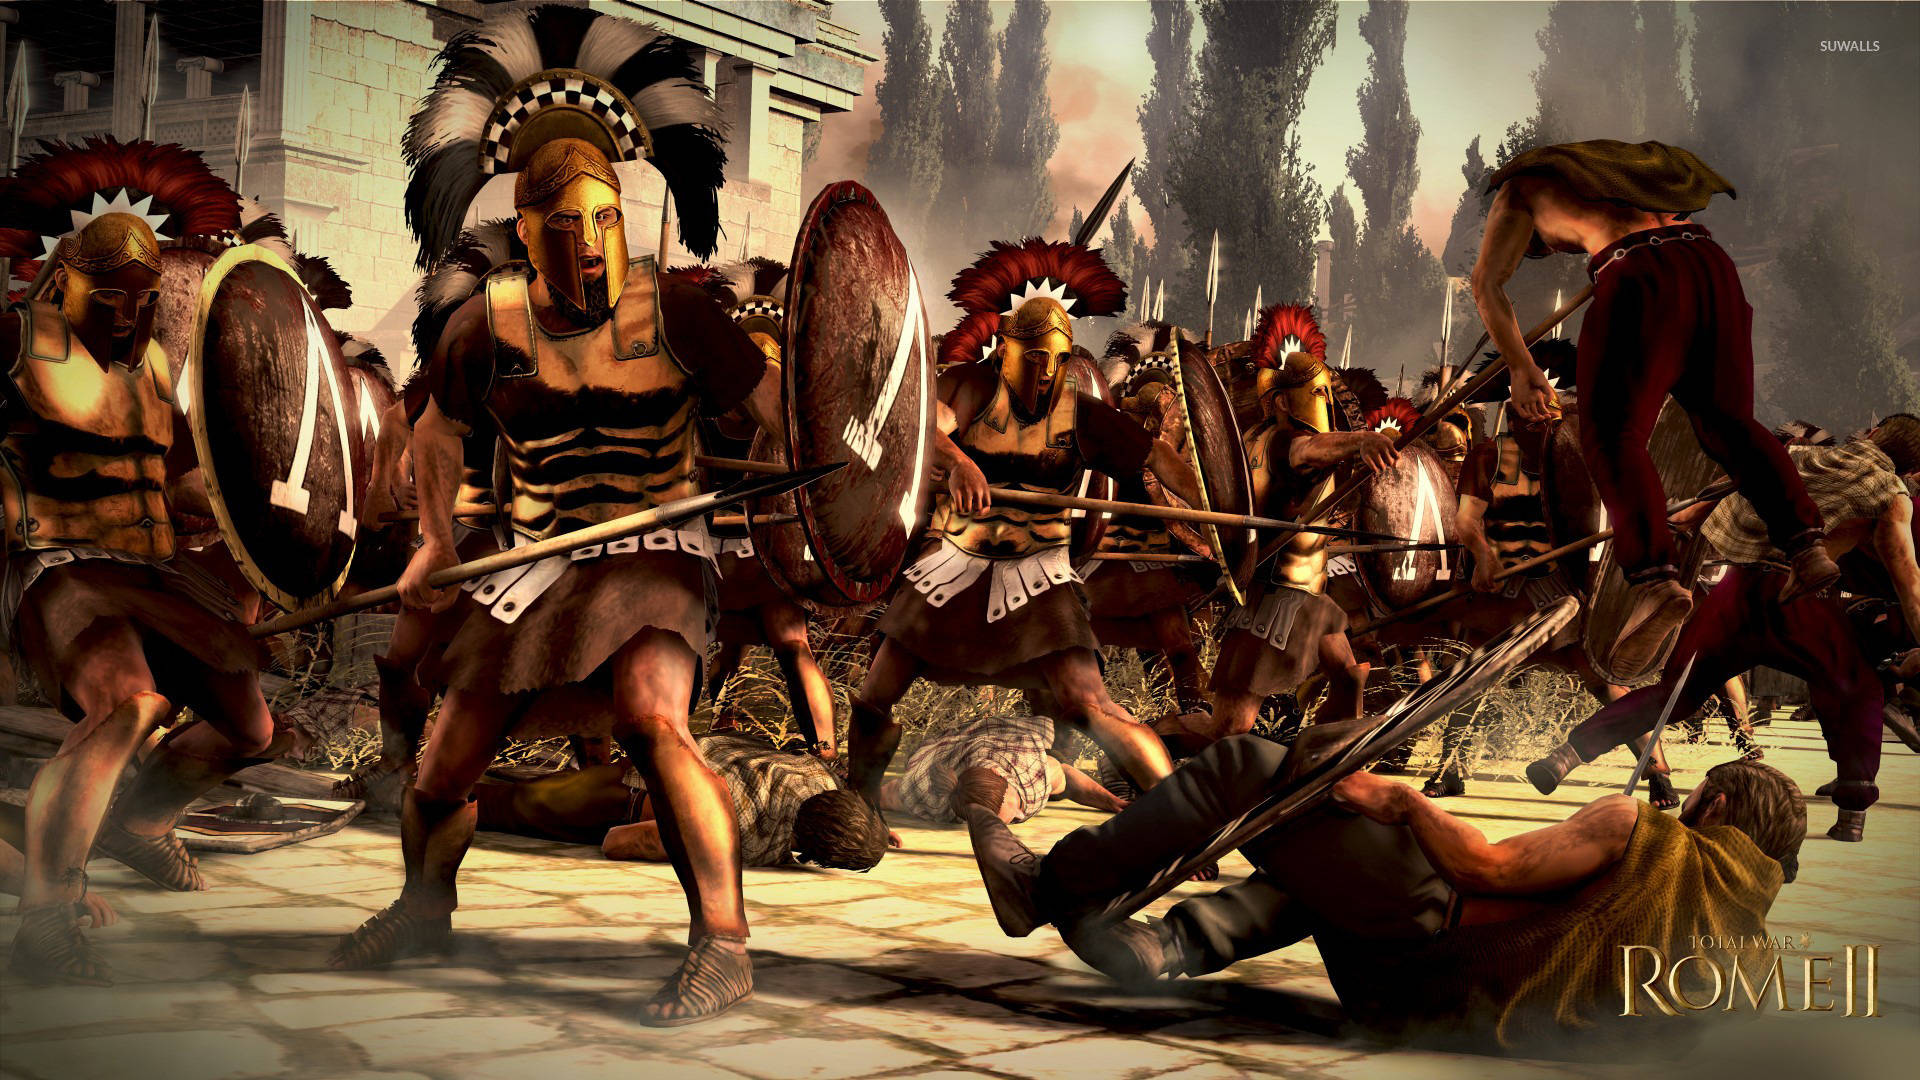 Be the leader of the Roman Empire in “Rome Total War” Wallpaper